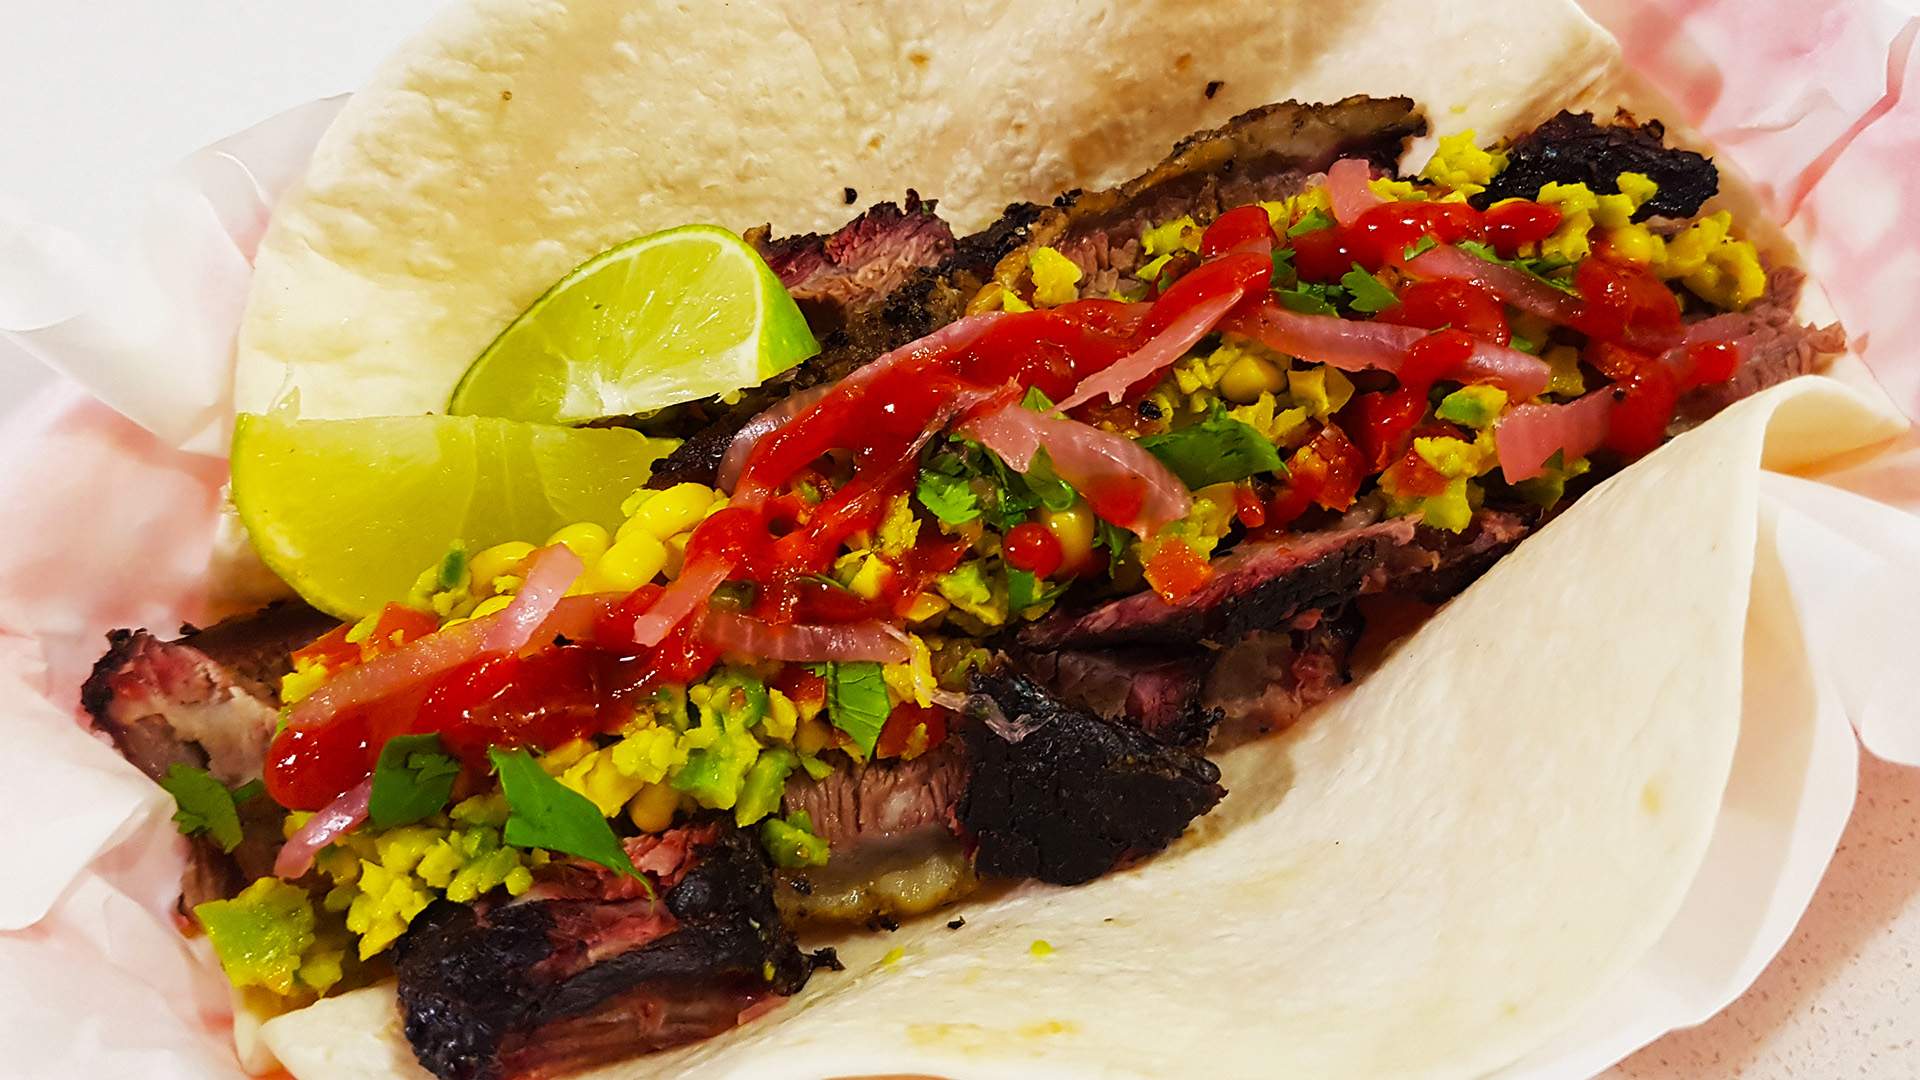 Two Newtown Favourites Are Teaming Up for a Tex-Mex Barbecue Pop-Up